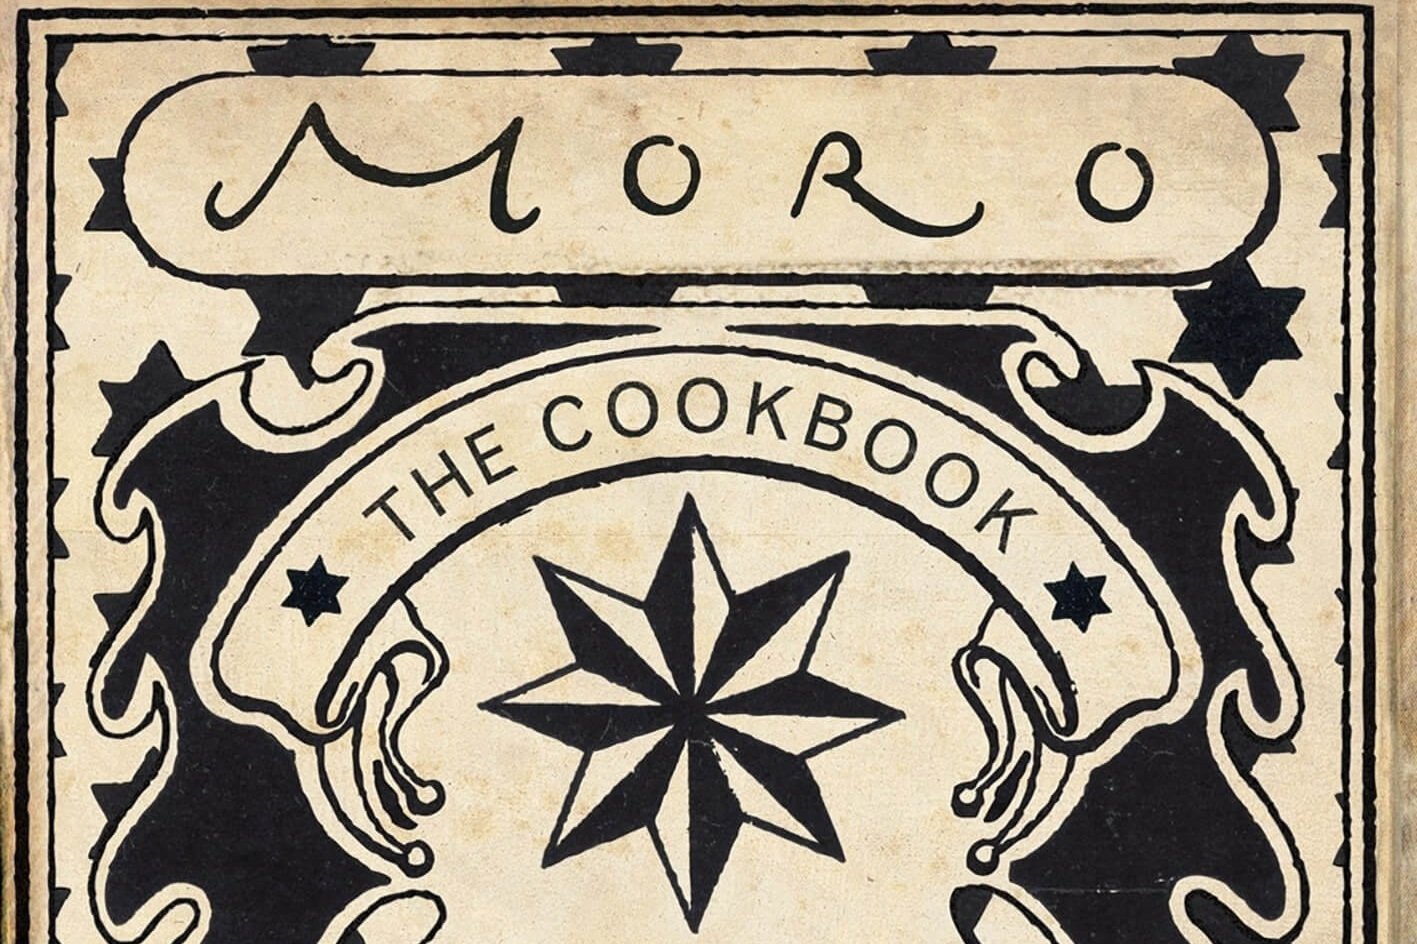 Behind the Cookbook: Moro